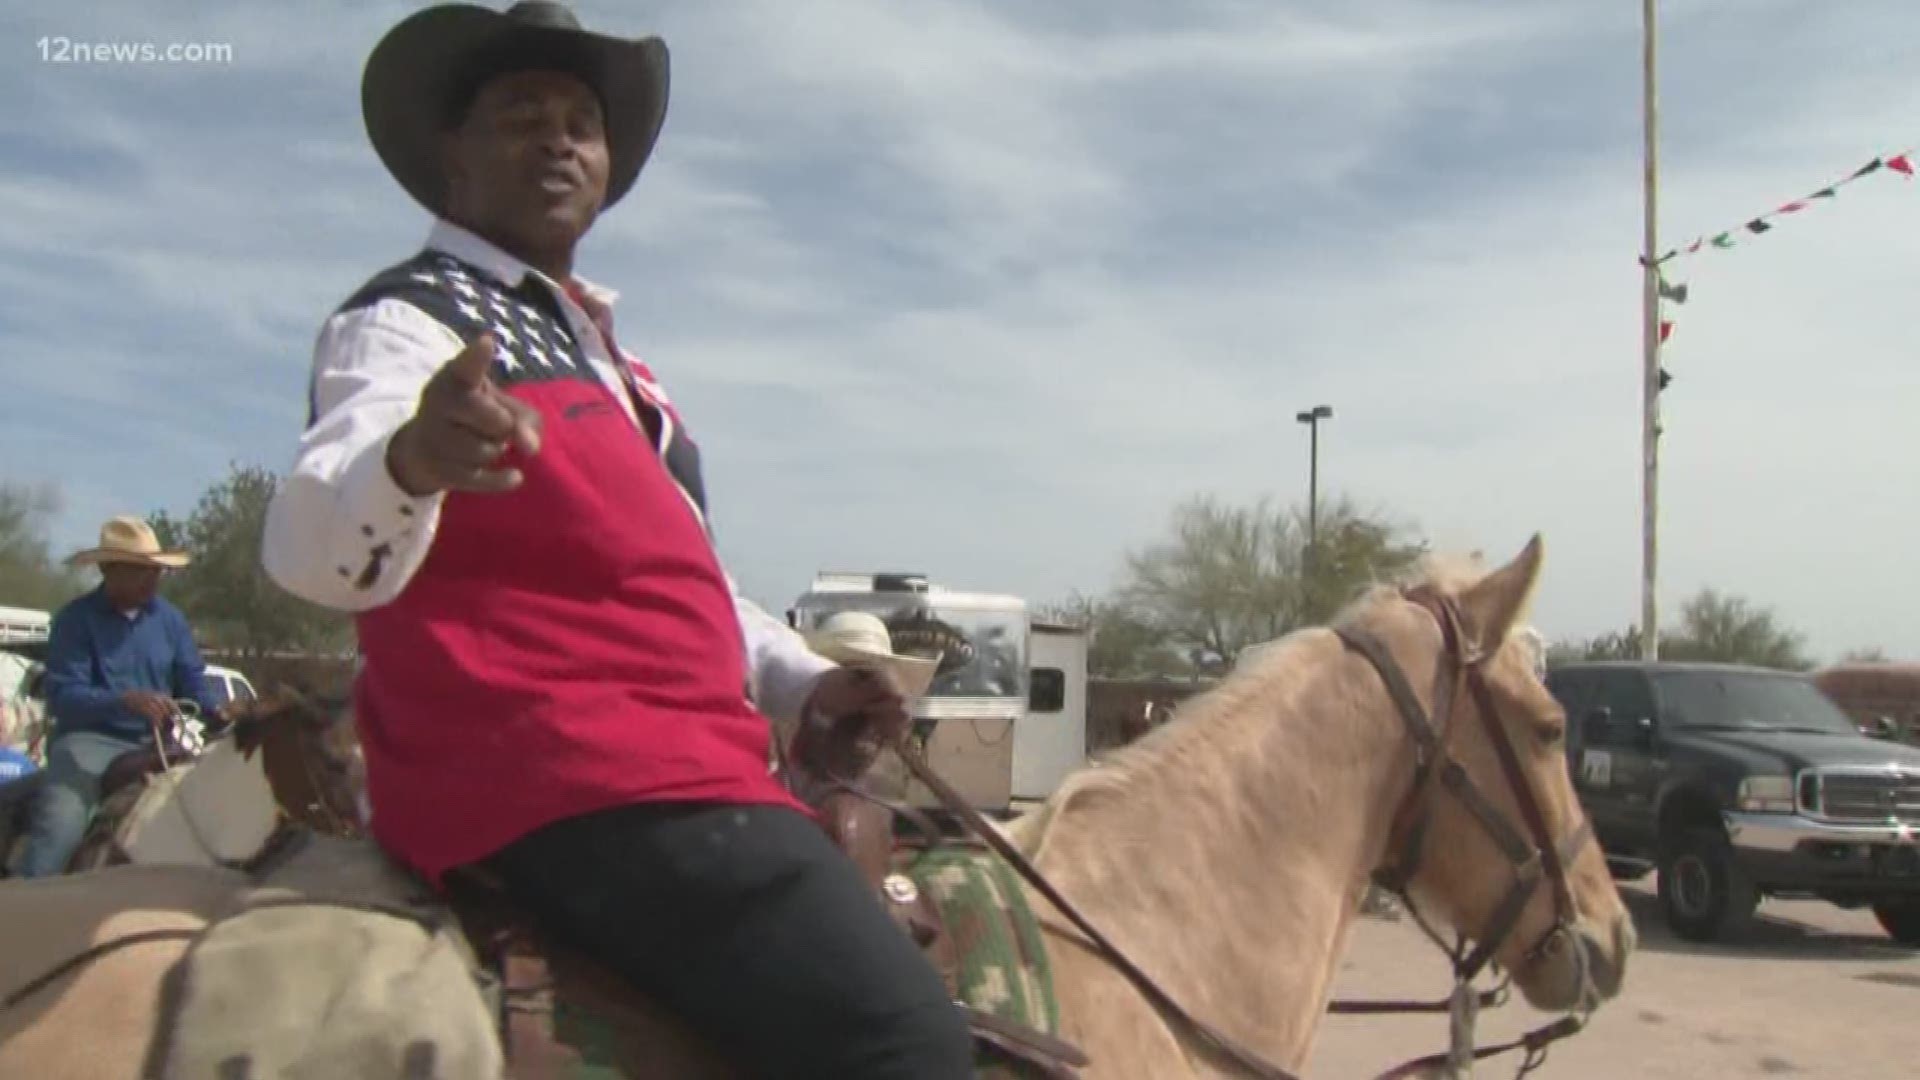 12 Sports' Bruce Cooper insists it's not his first rodeo as he gets up on a horse at last weekend's Arizona Black Rodeo in Chandler.